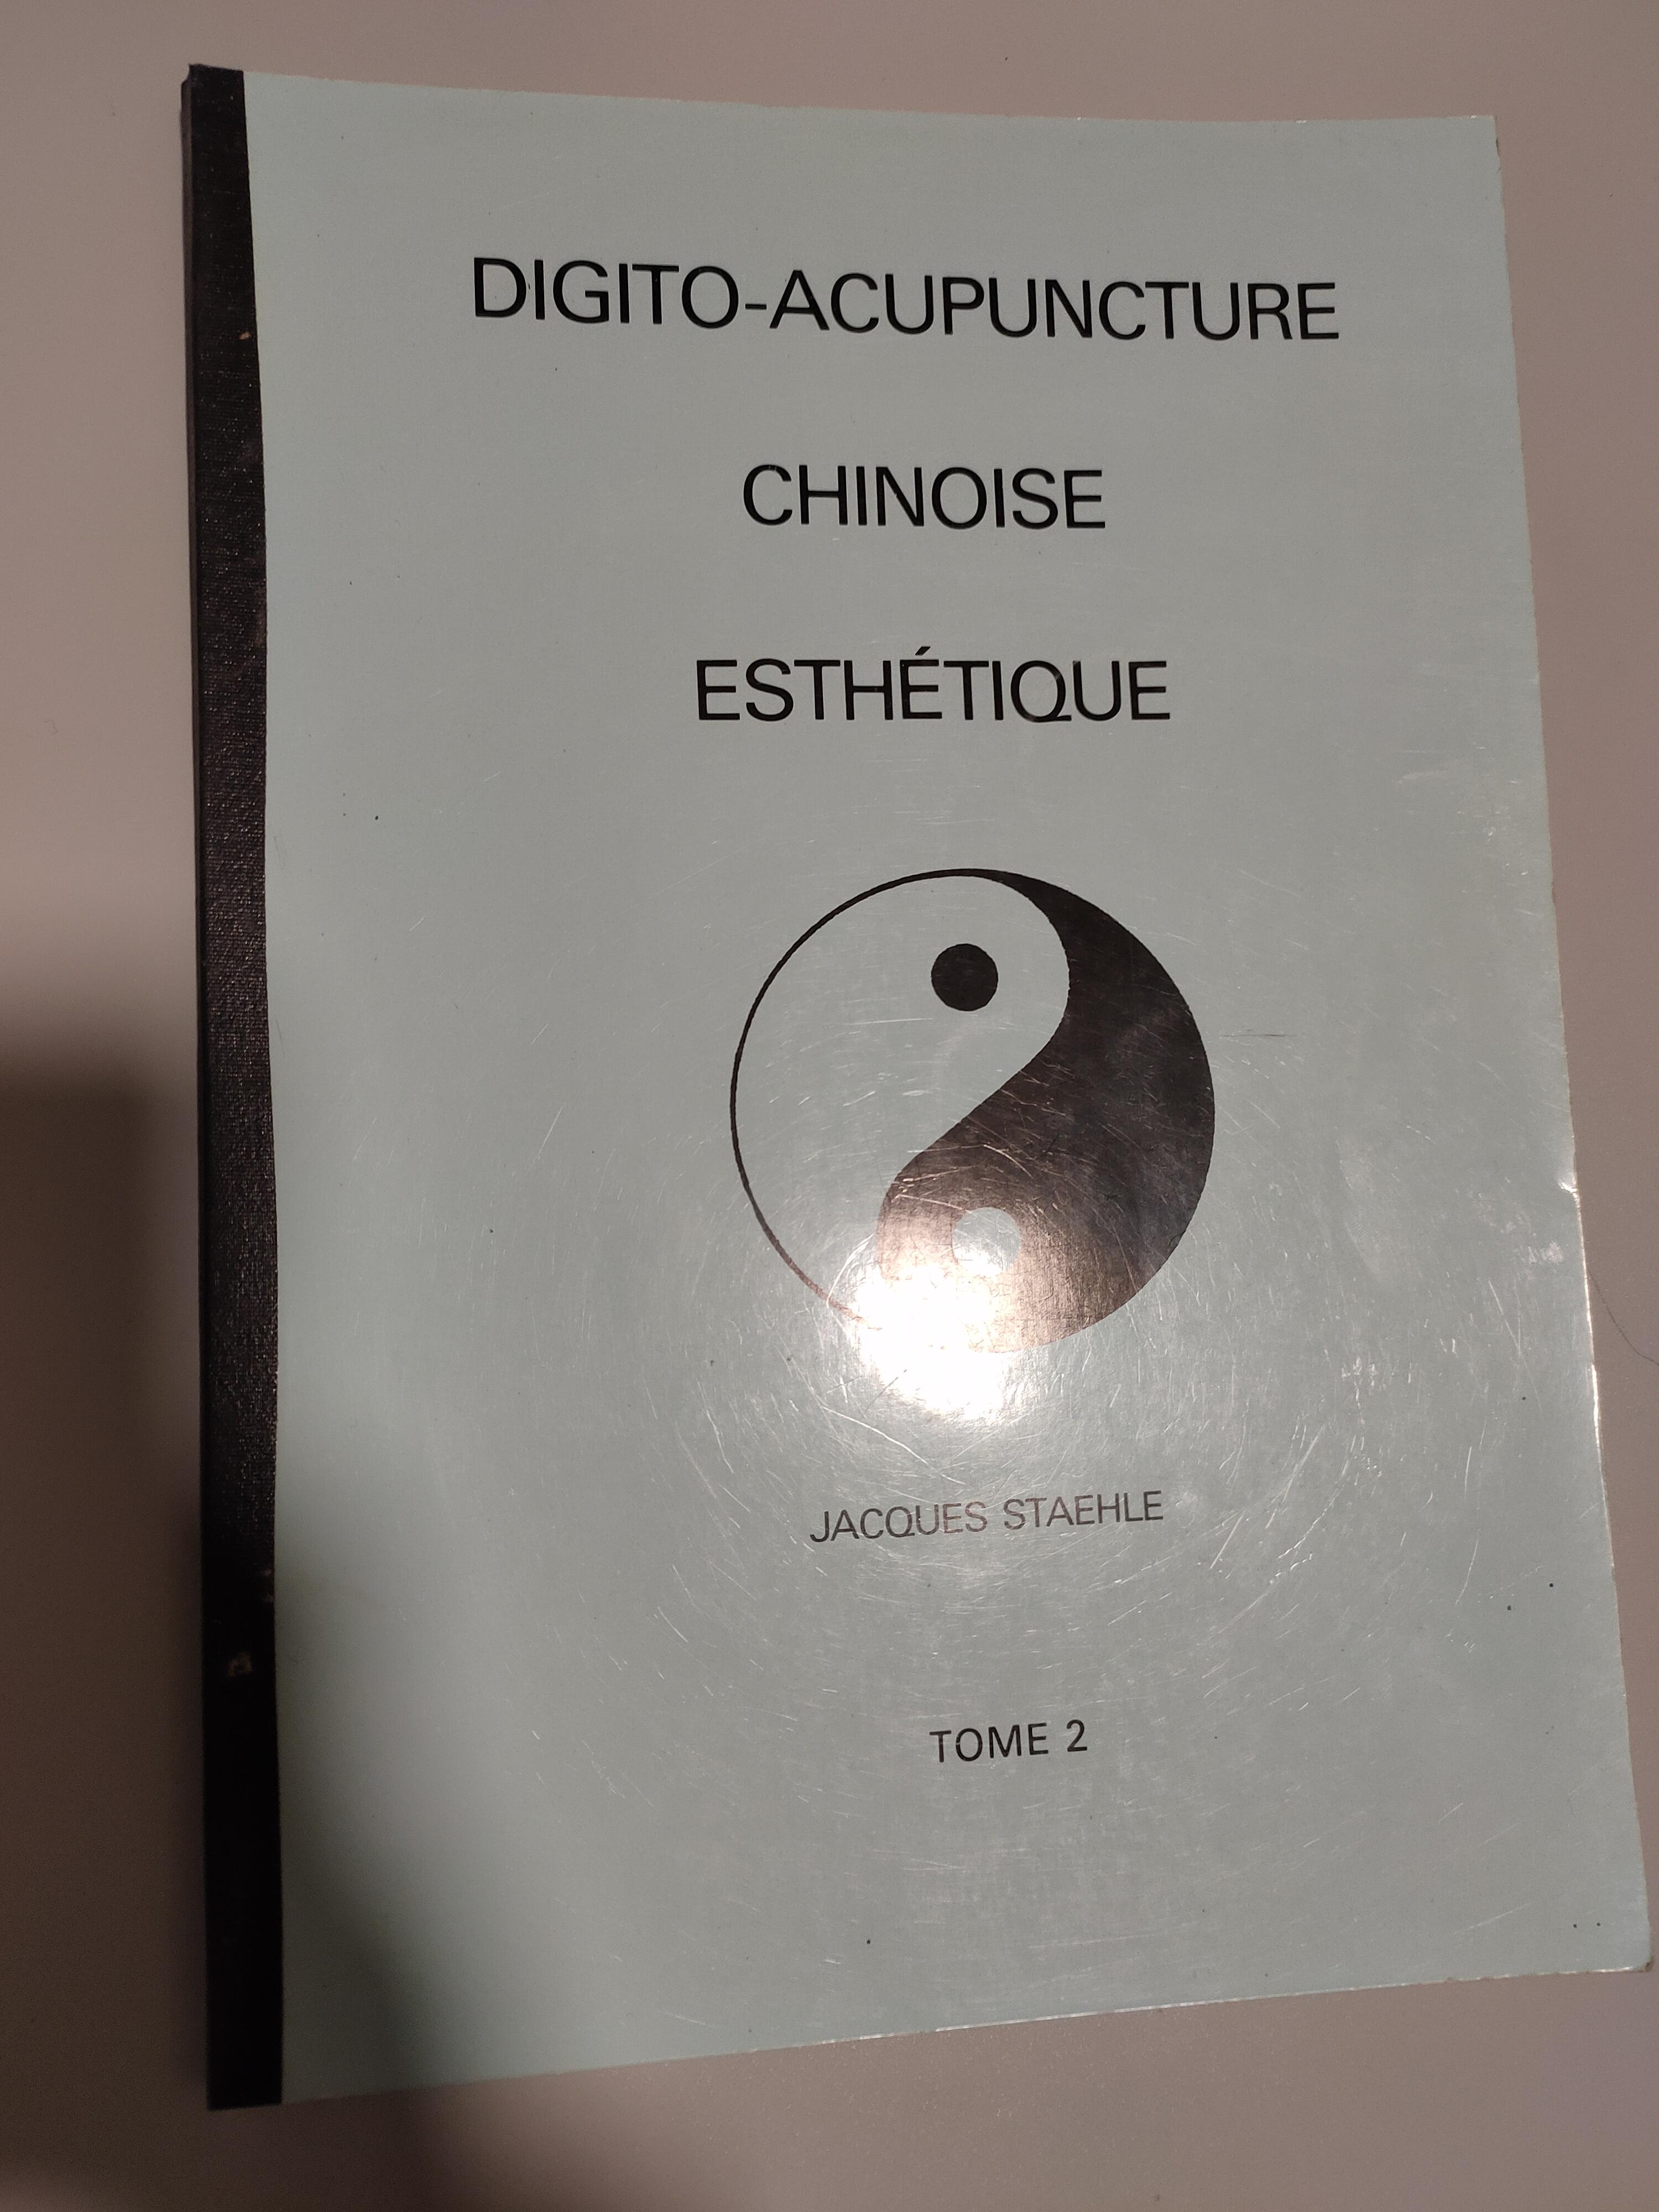 Digito-acupuncture chinoise esthetique - Jacques Staehle - Tome 2